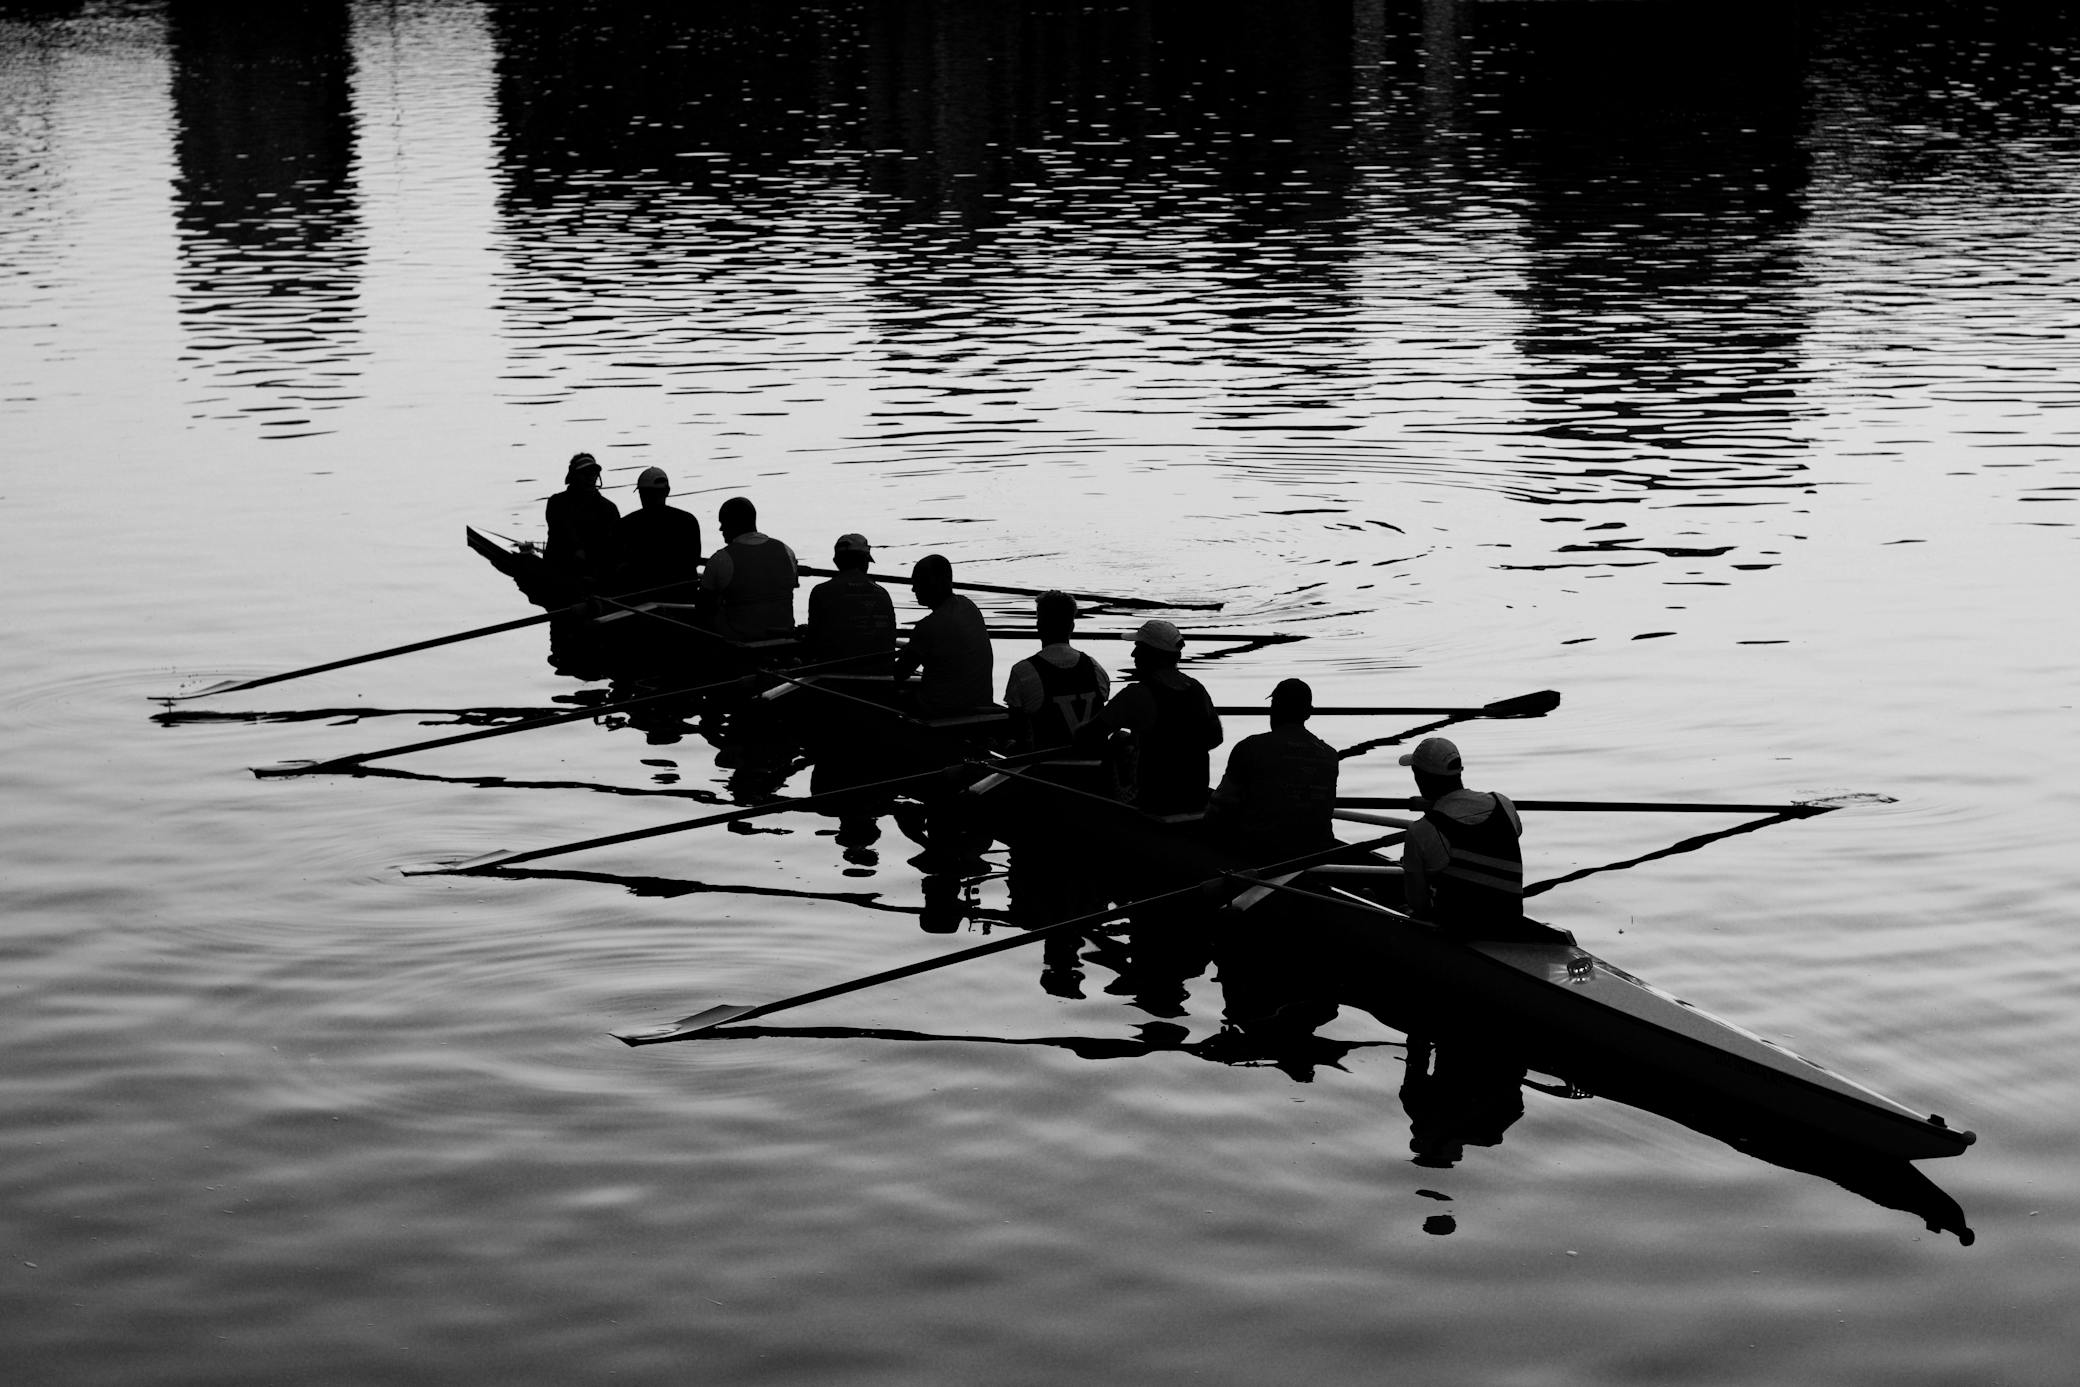 A rowing crew is silhouetted while resting in a shell boat on a calm body of water